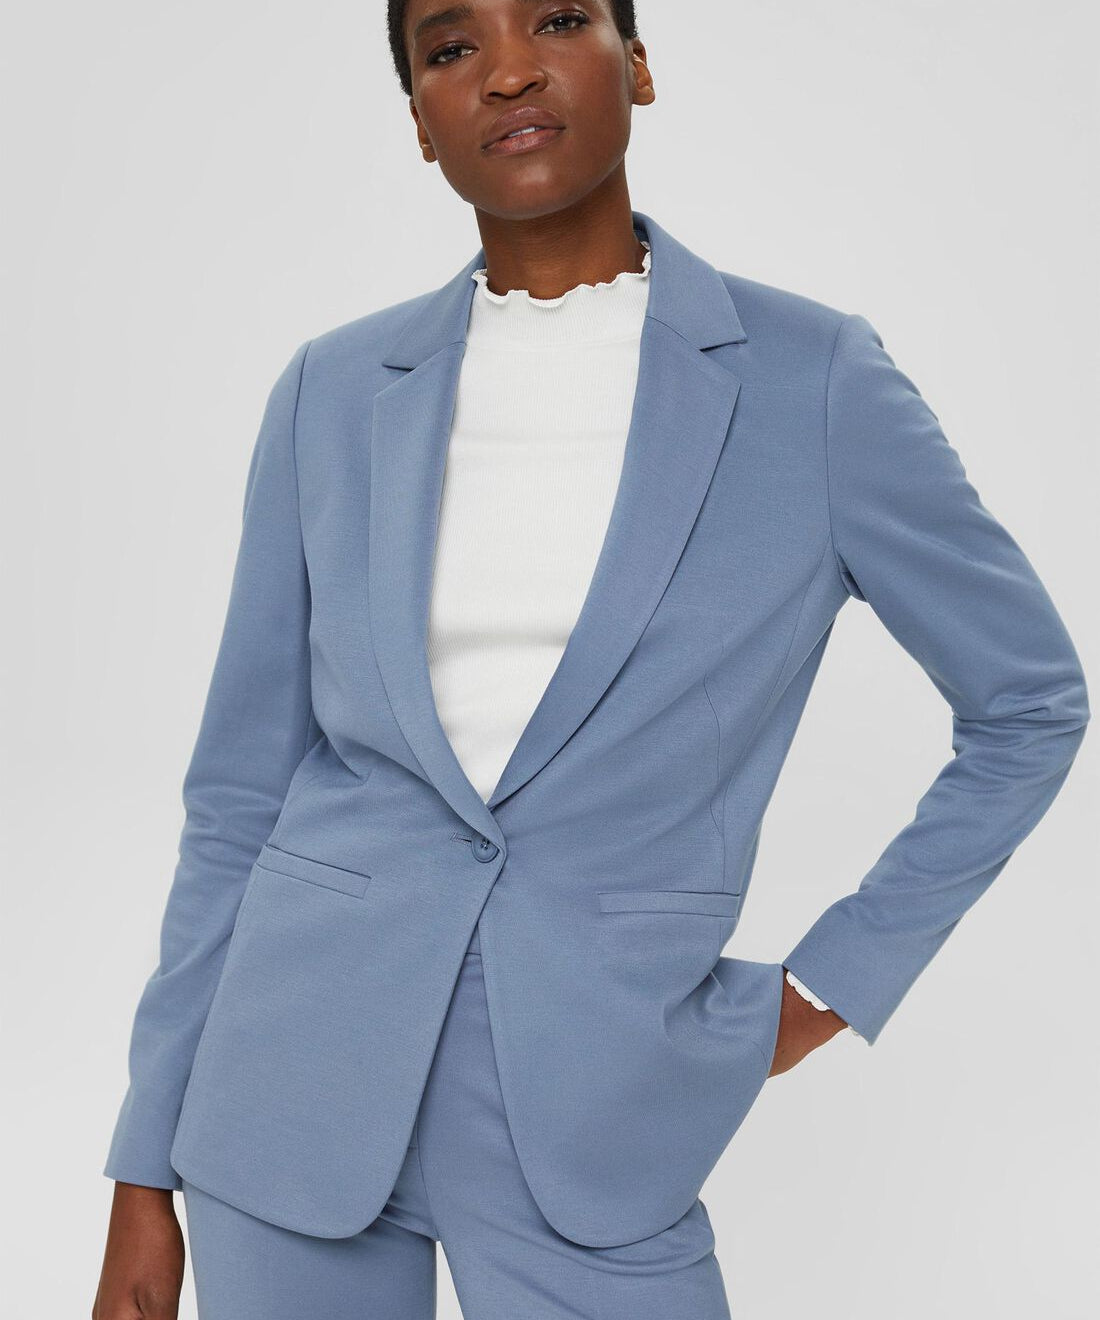 How to Choose the Perfect Blazer - Blue Sky Fashions & Lingerie